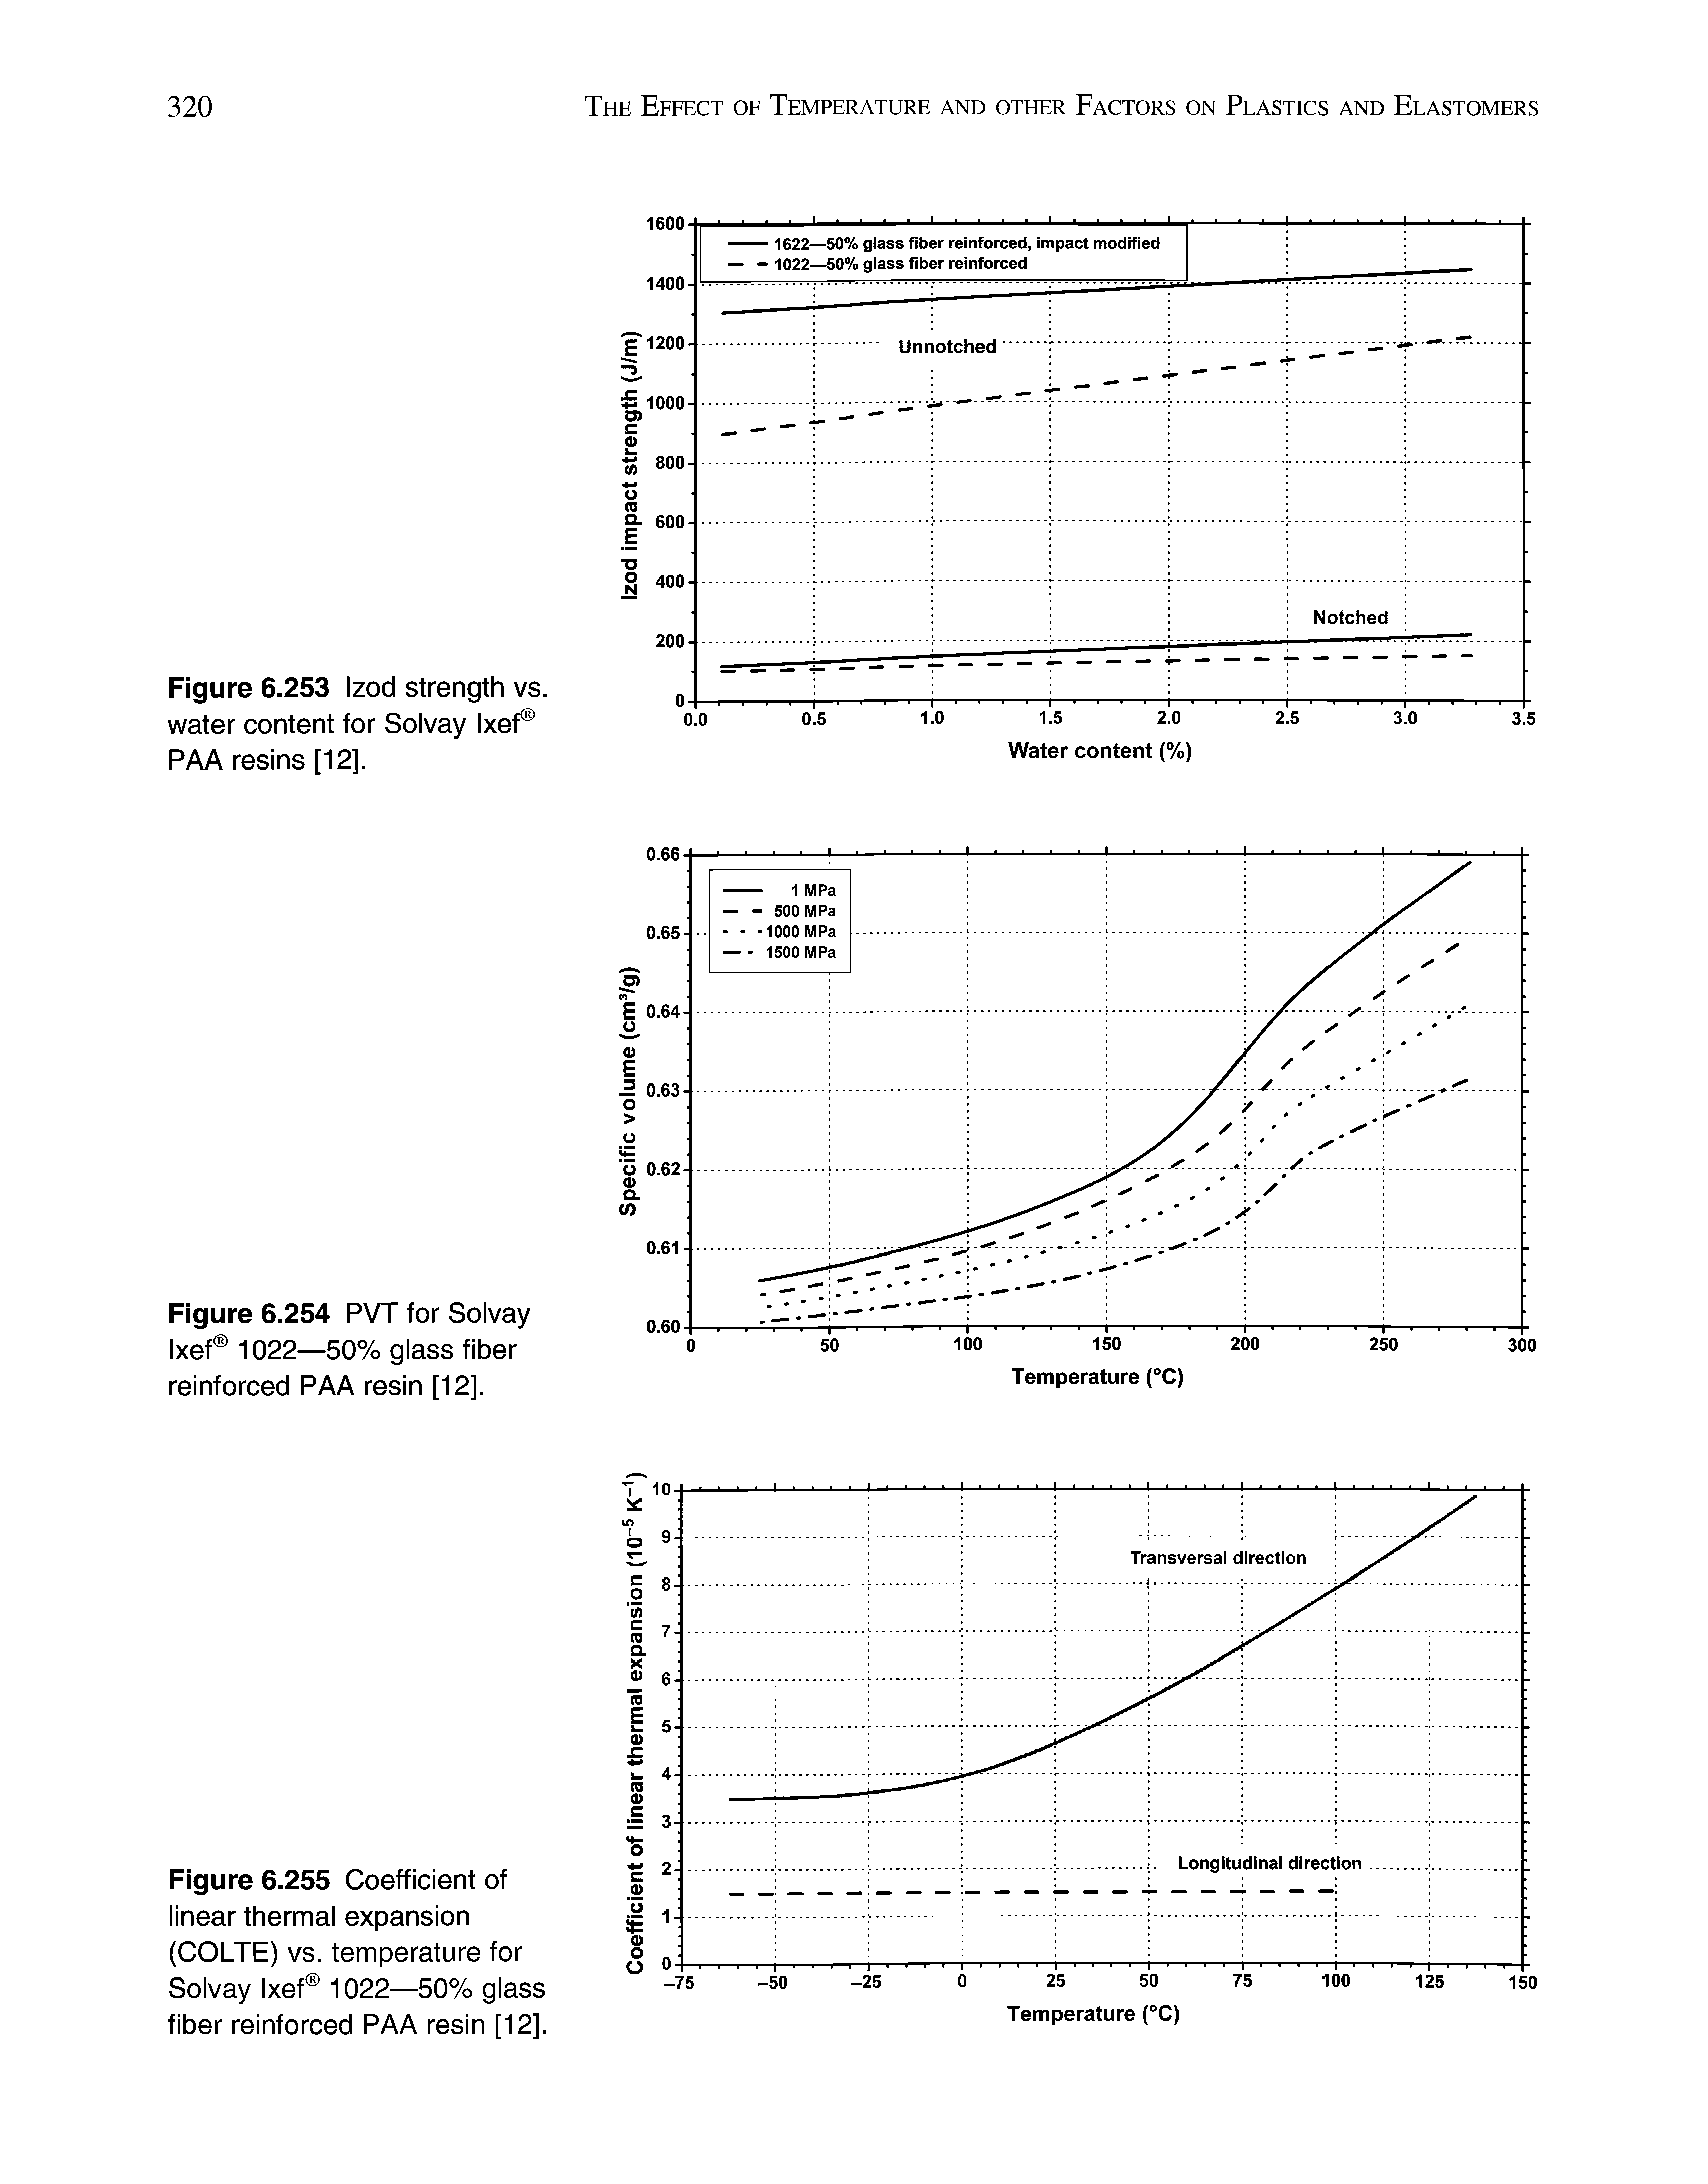 Figure 6.253 Izod strength vs. water content for Solvay Ixef PAA resins [12].